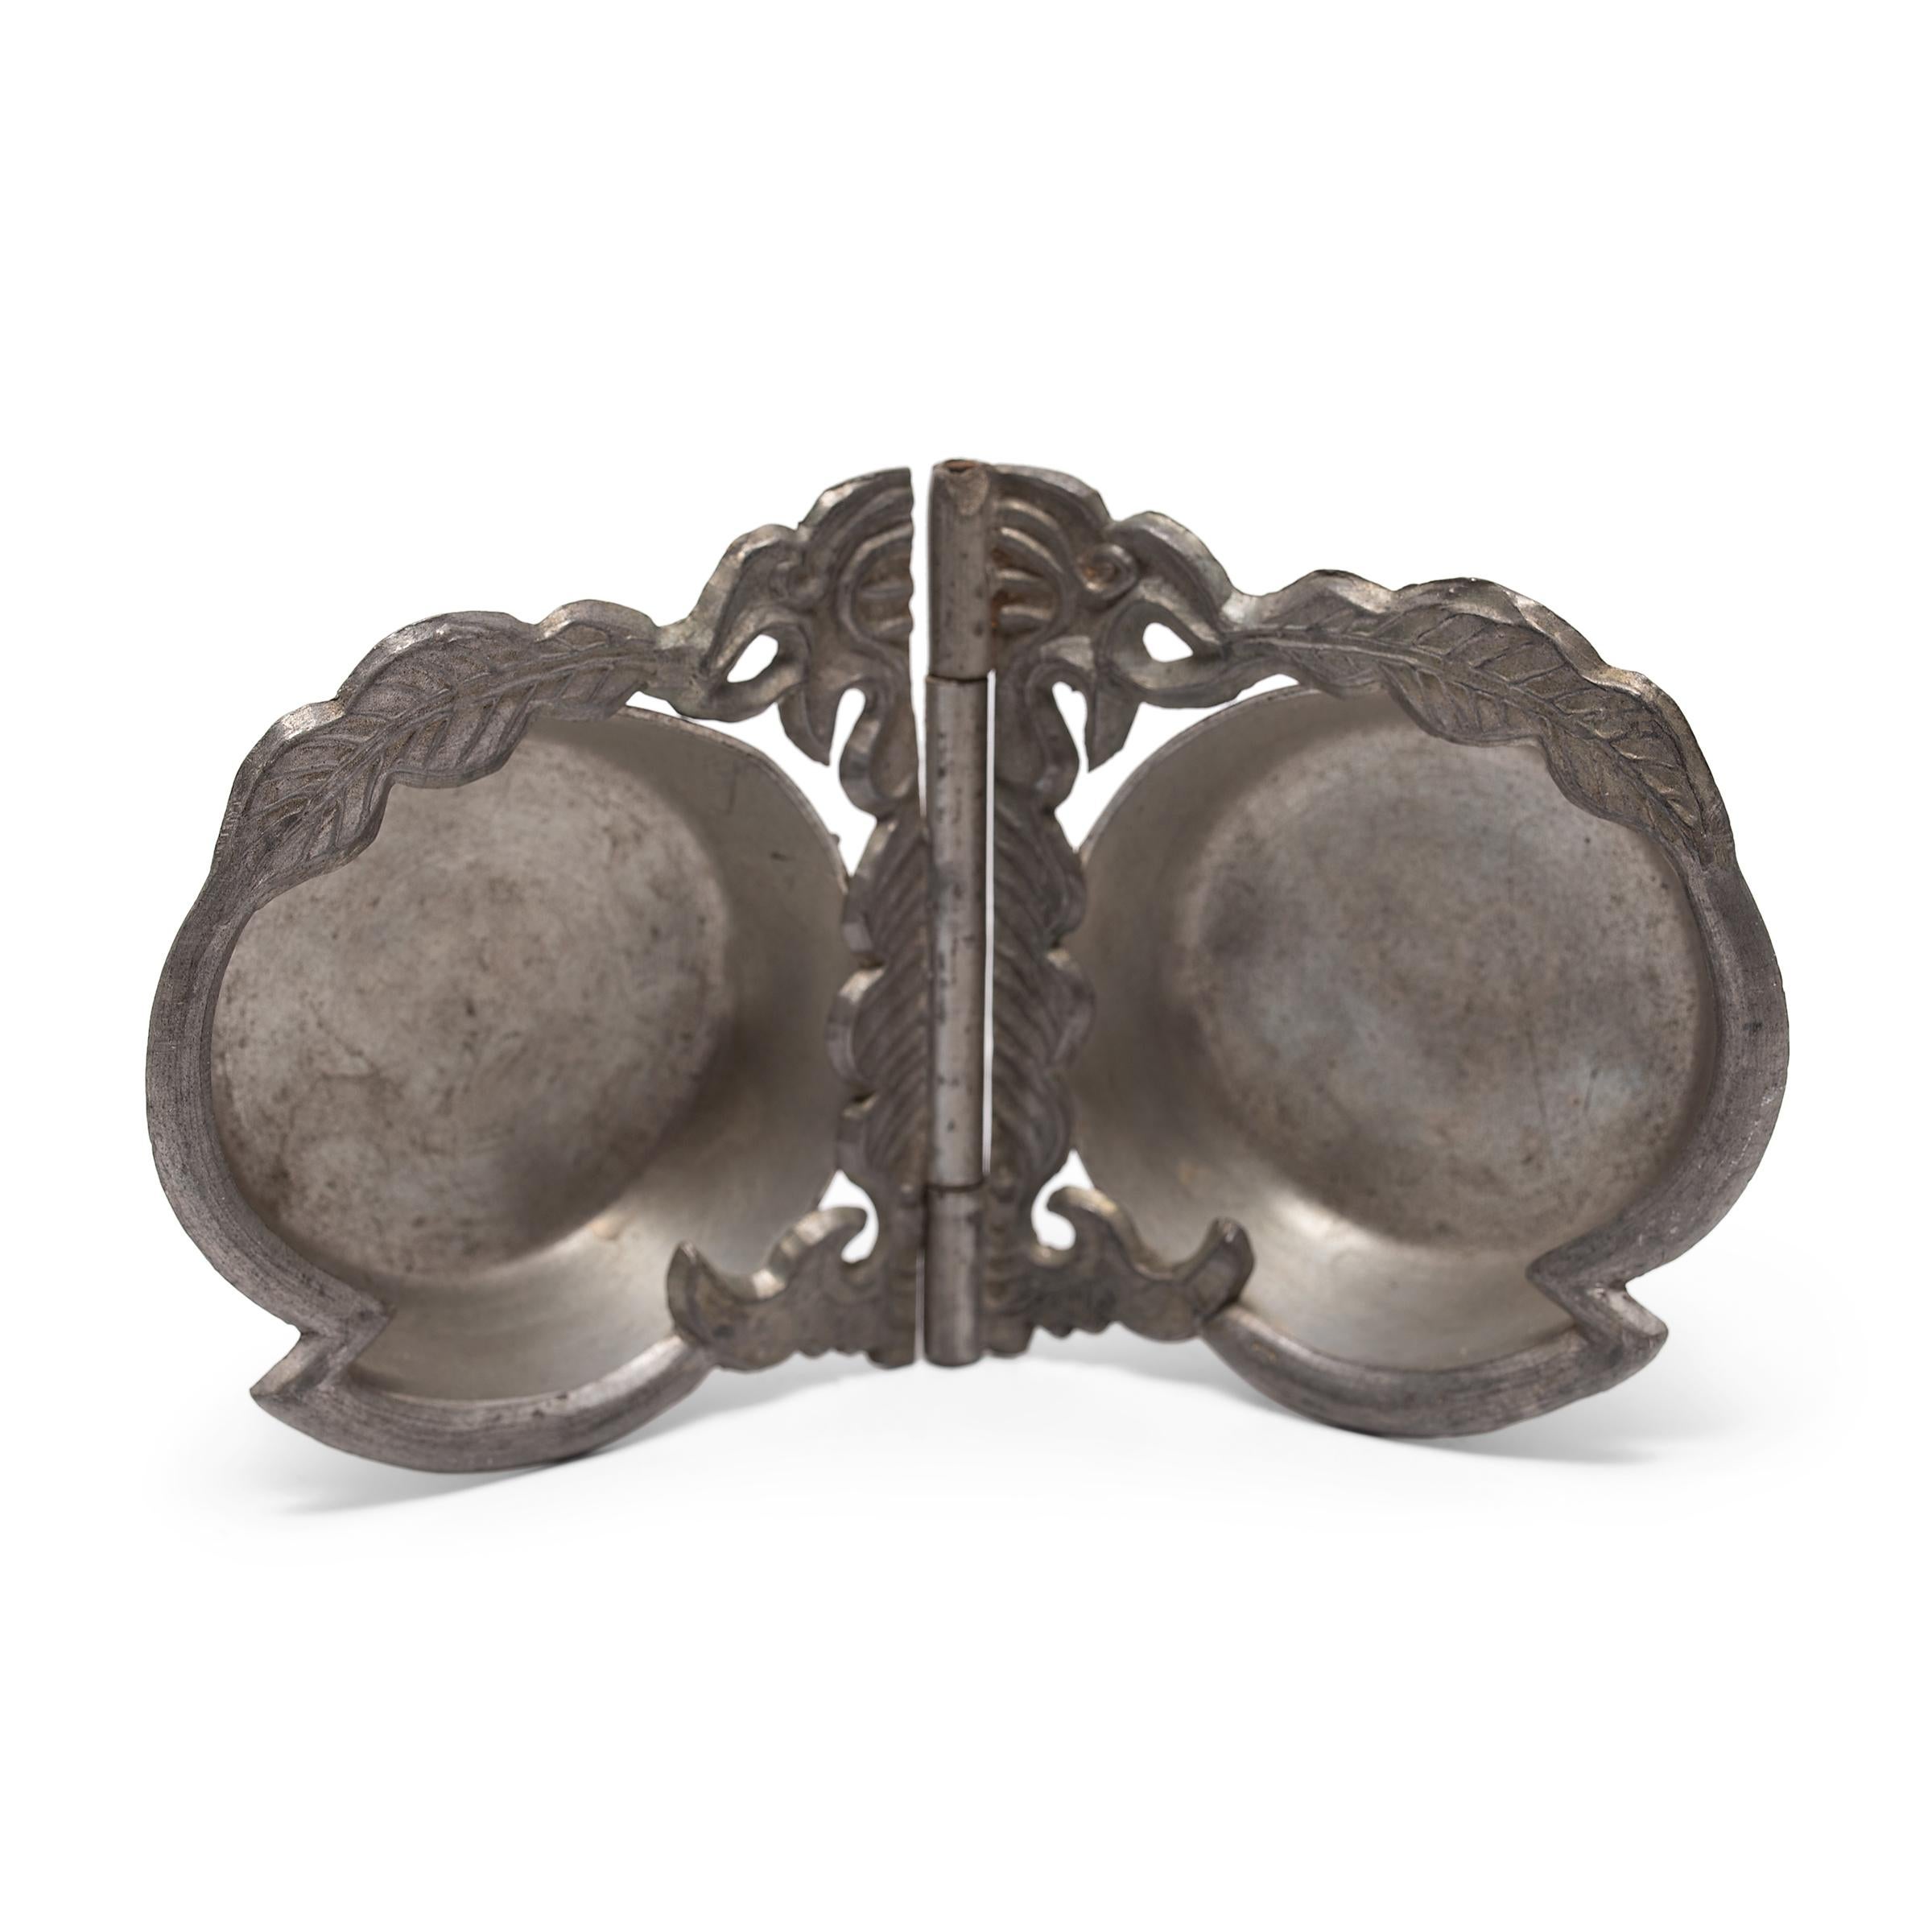 This hand held pewter dish is an excellent example of fine Chinese metalwork of the 20th century. During the Qing dynasty, pewter craftsmen experimented with new techniques, showing the influence of Western silver tableware styles as well as Manchu